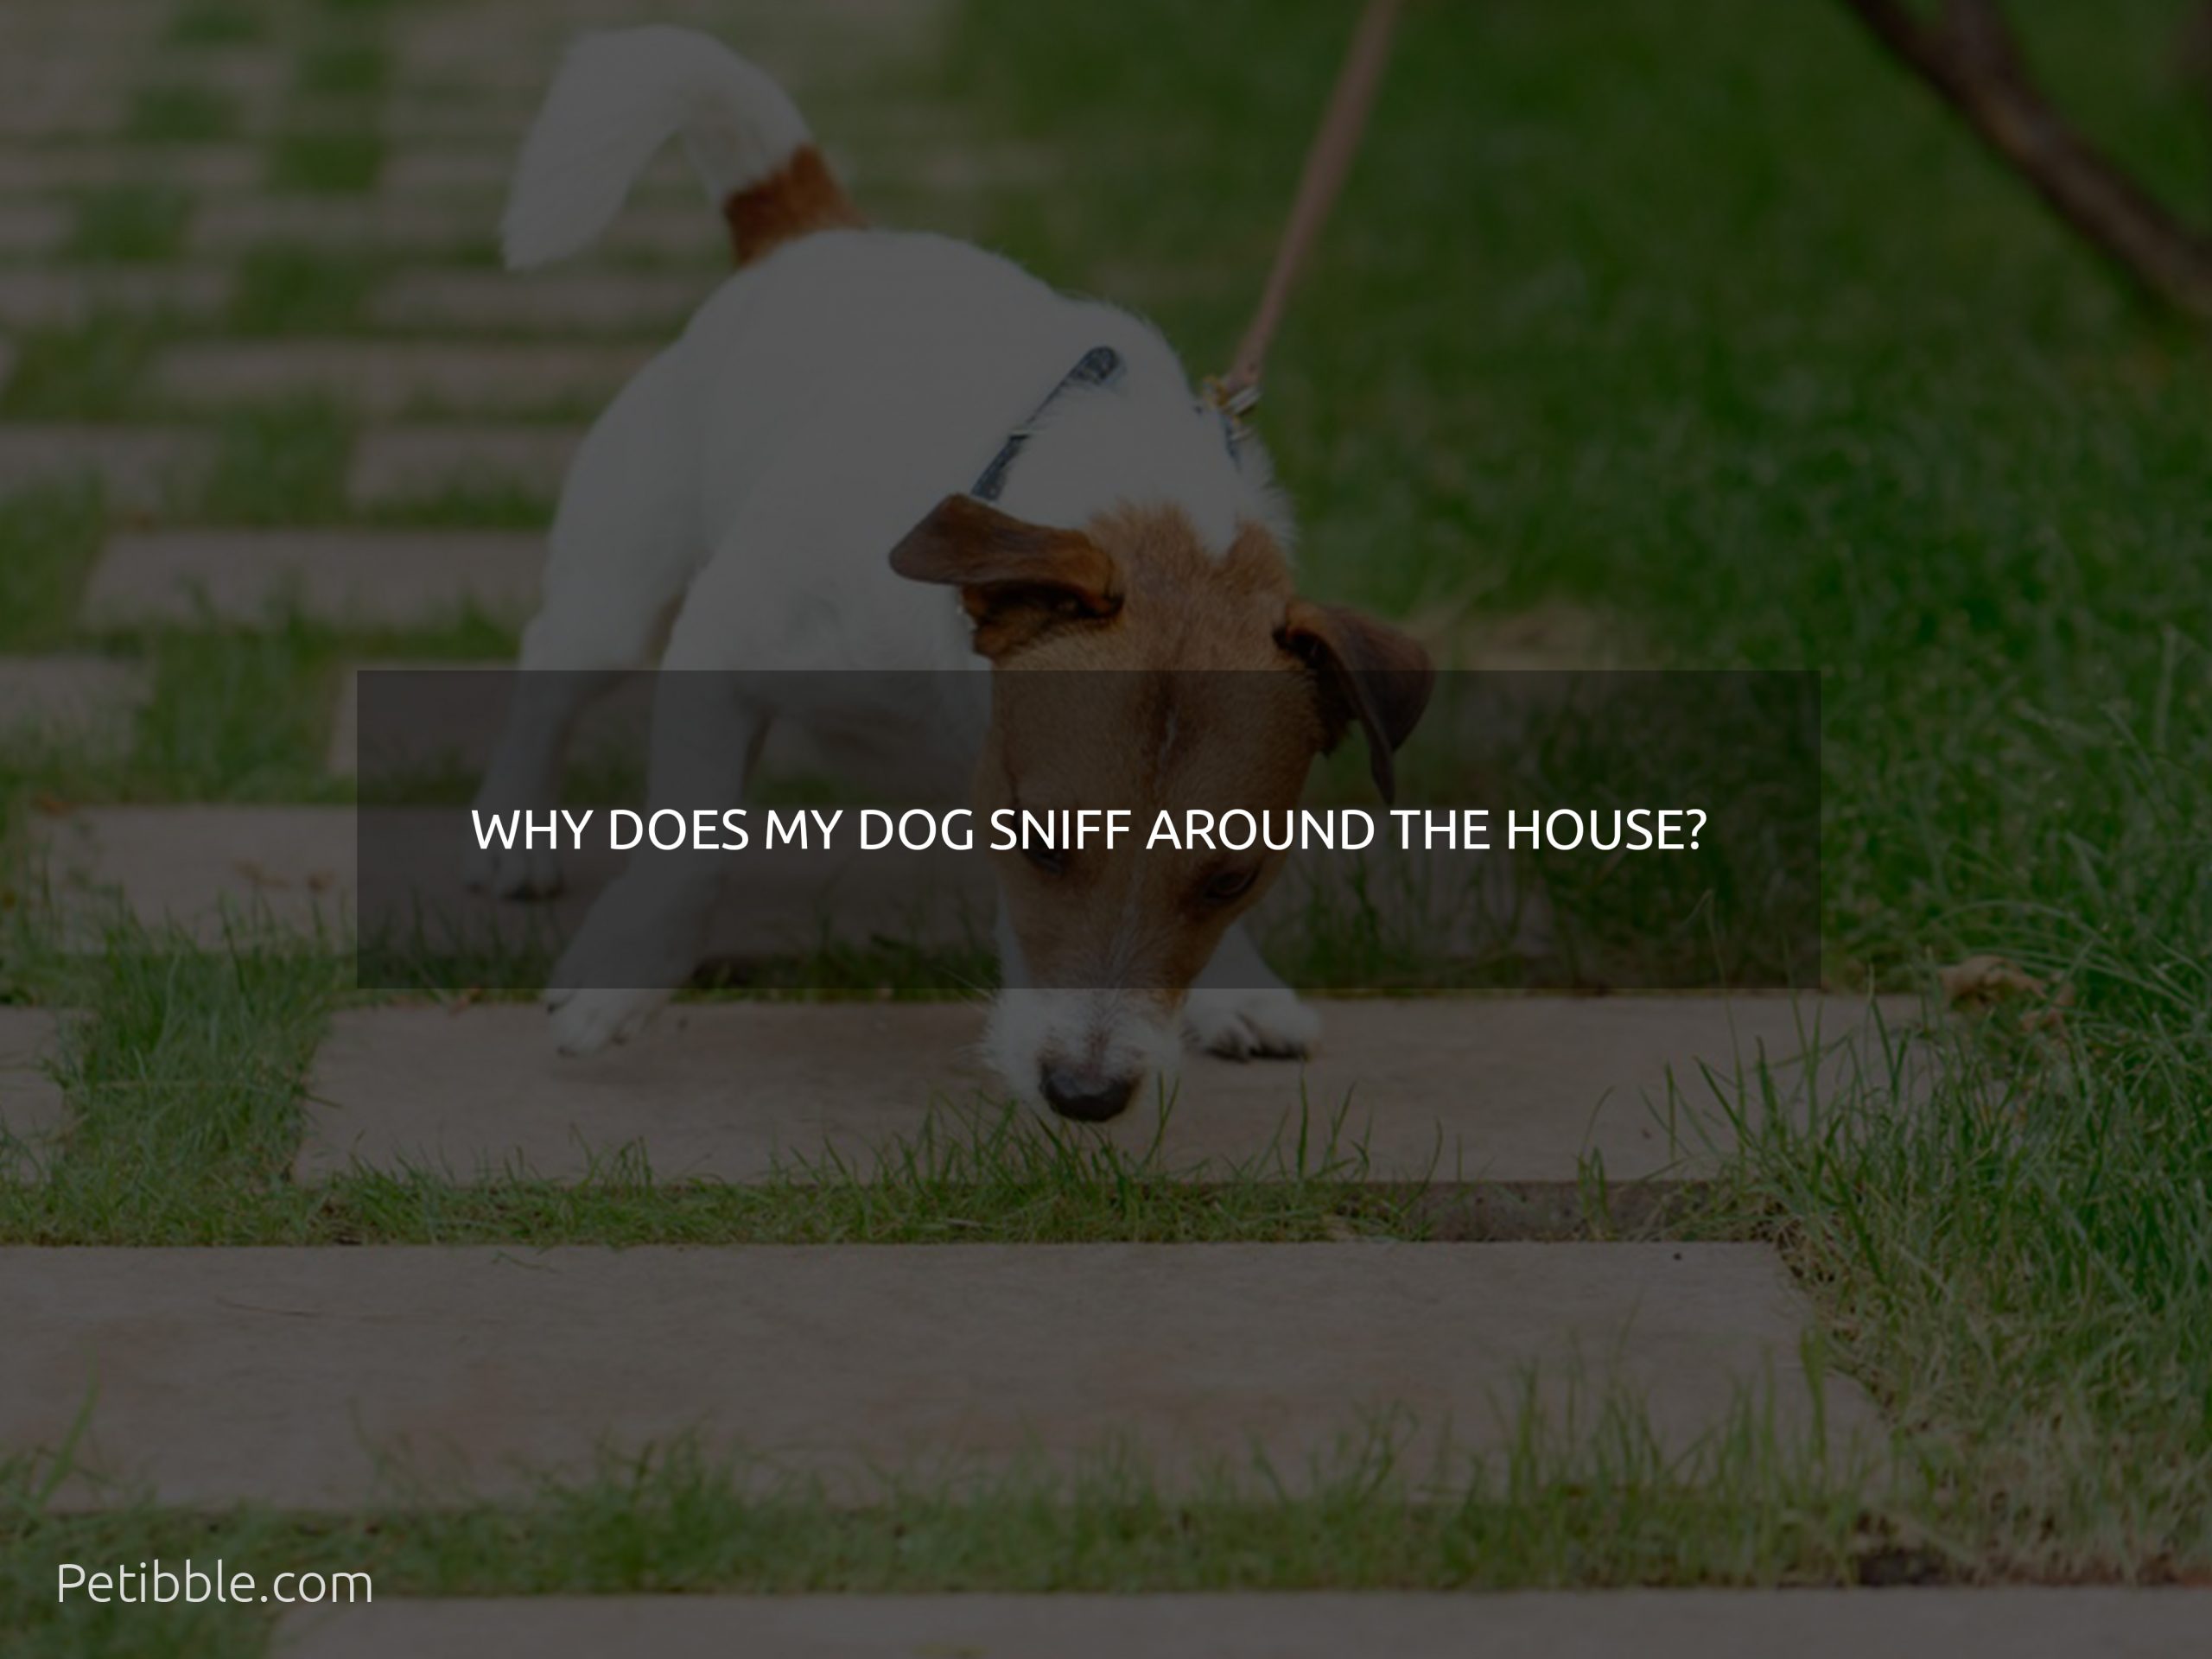 Why does my dog sniff around the house?